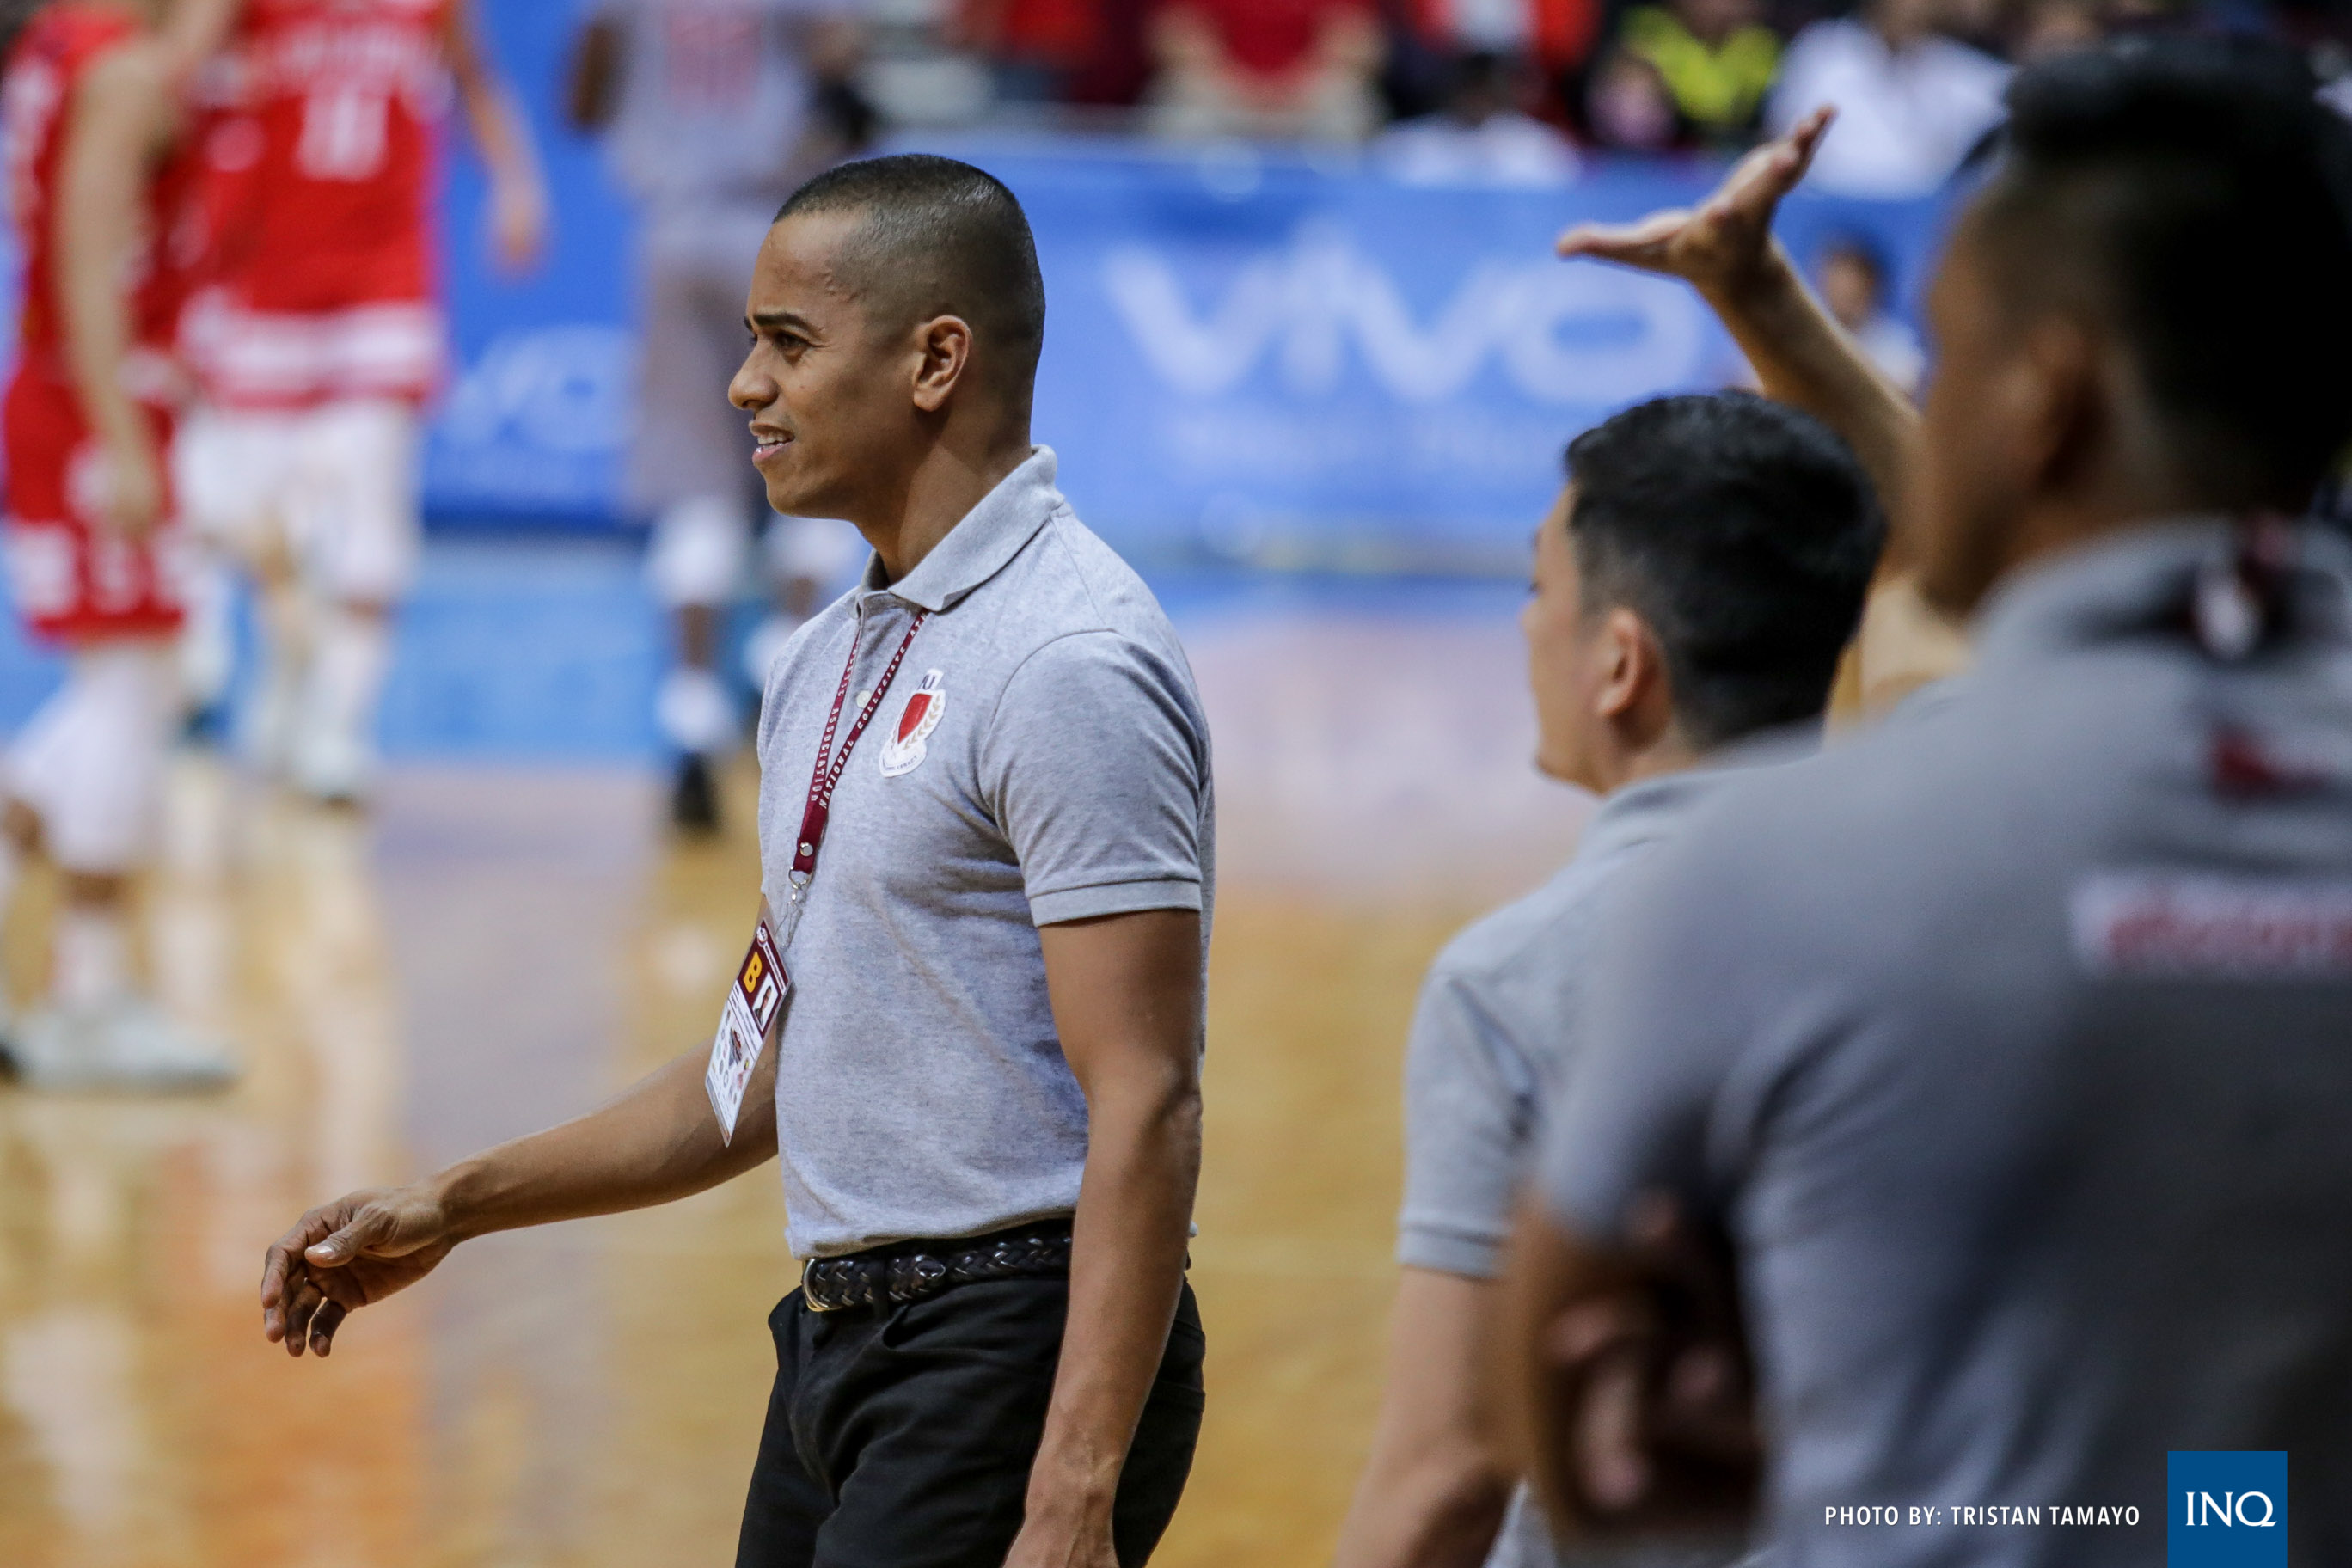 NCAA No Finals Game 2 suspension for Robinson for remarks on Perez ban